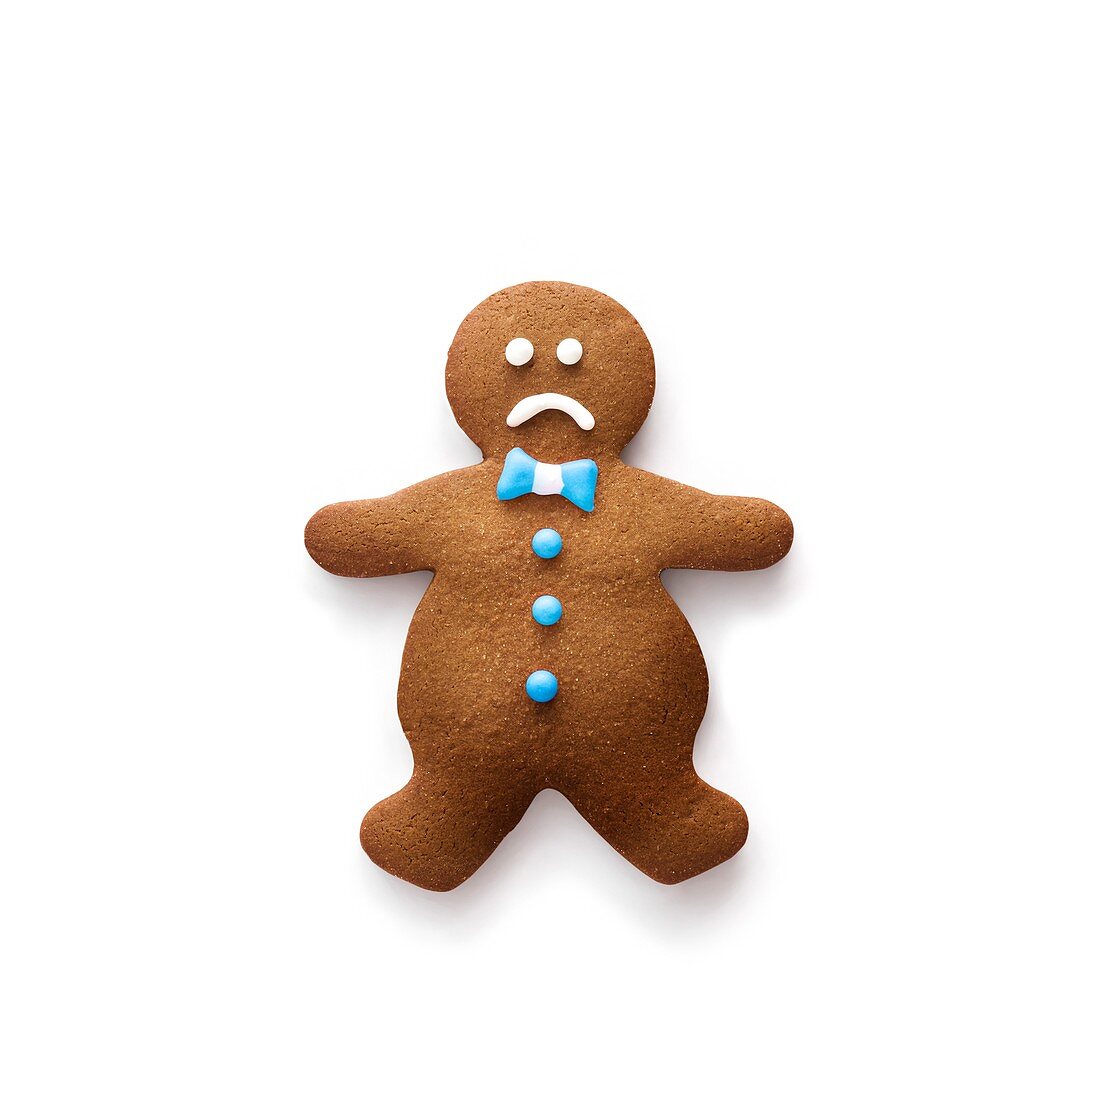 Obese gingerbread man